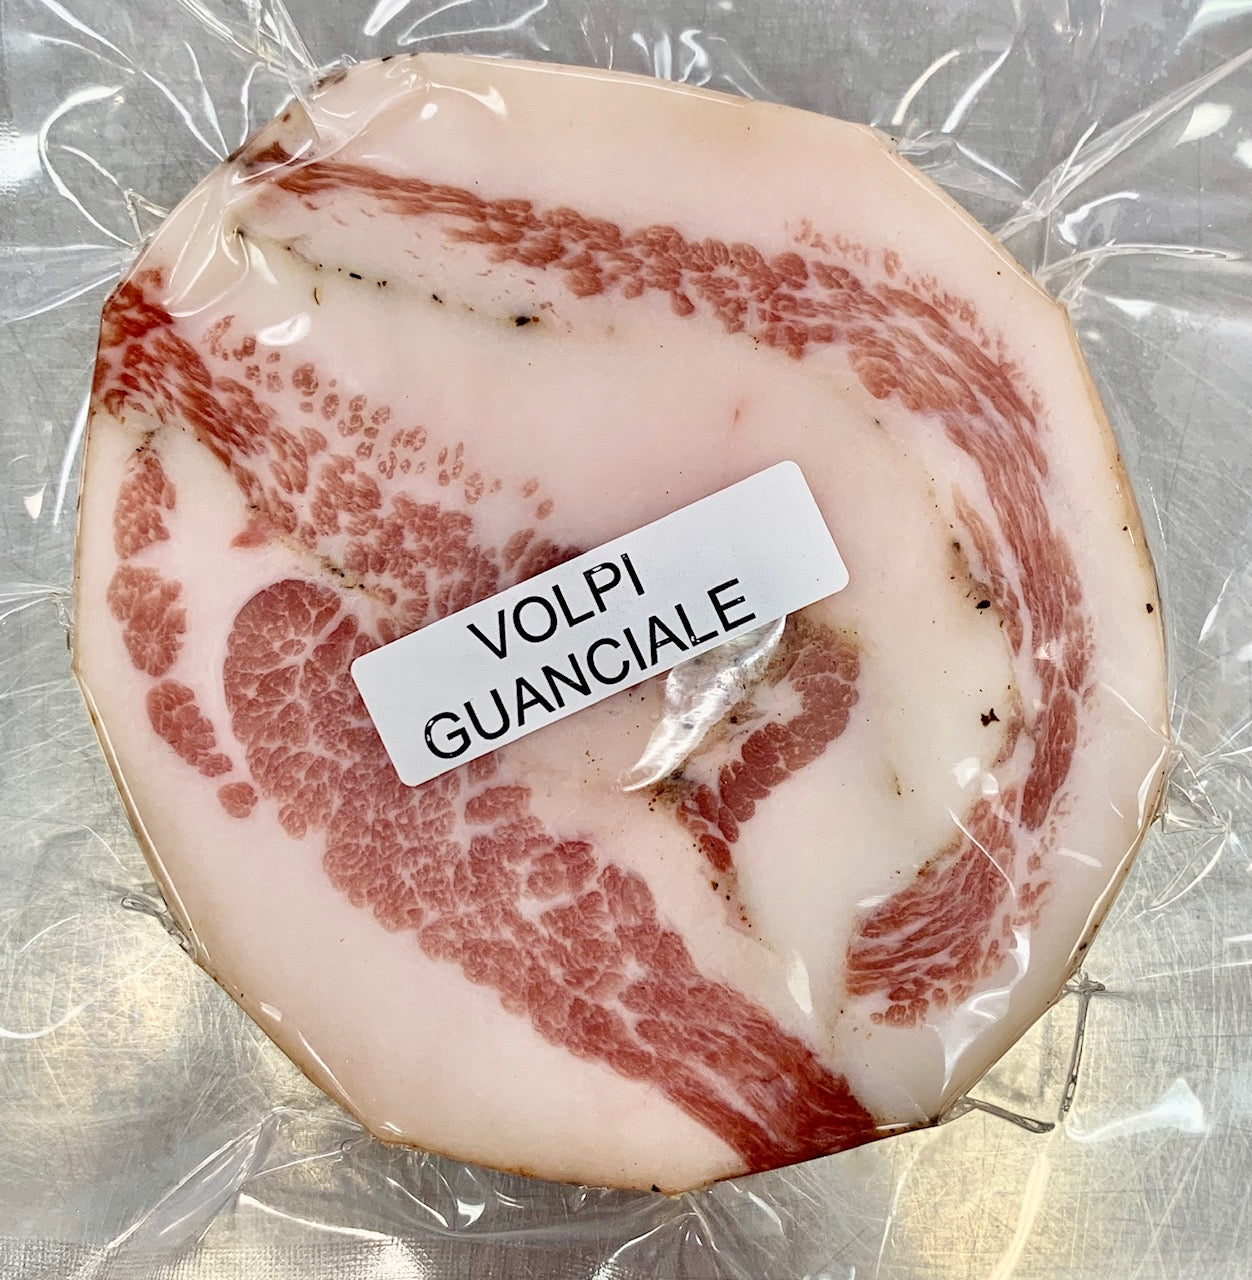 Rolled Guanciale - Volpi